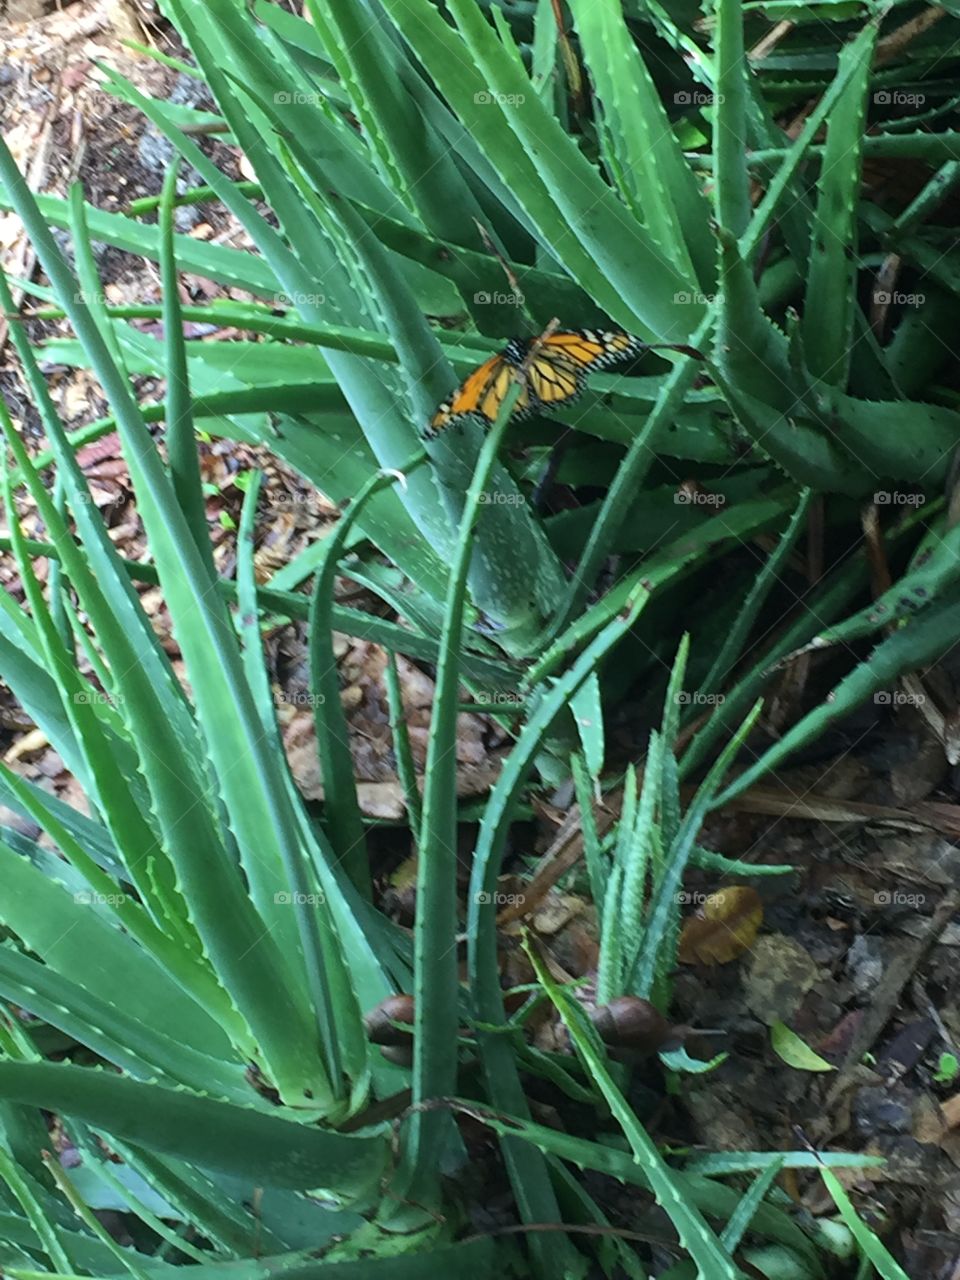 Monarch butterfly perched on a green aloe plant.